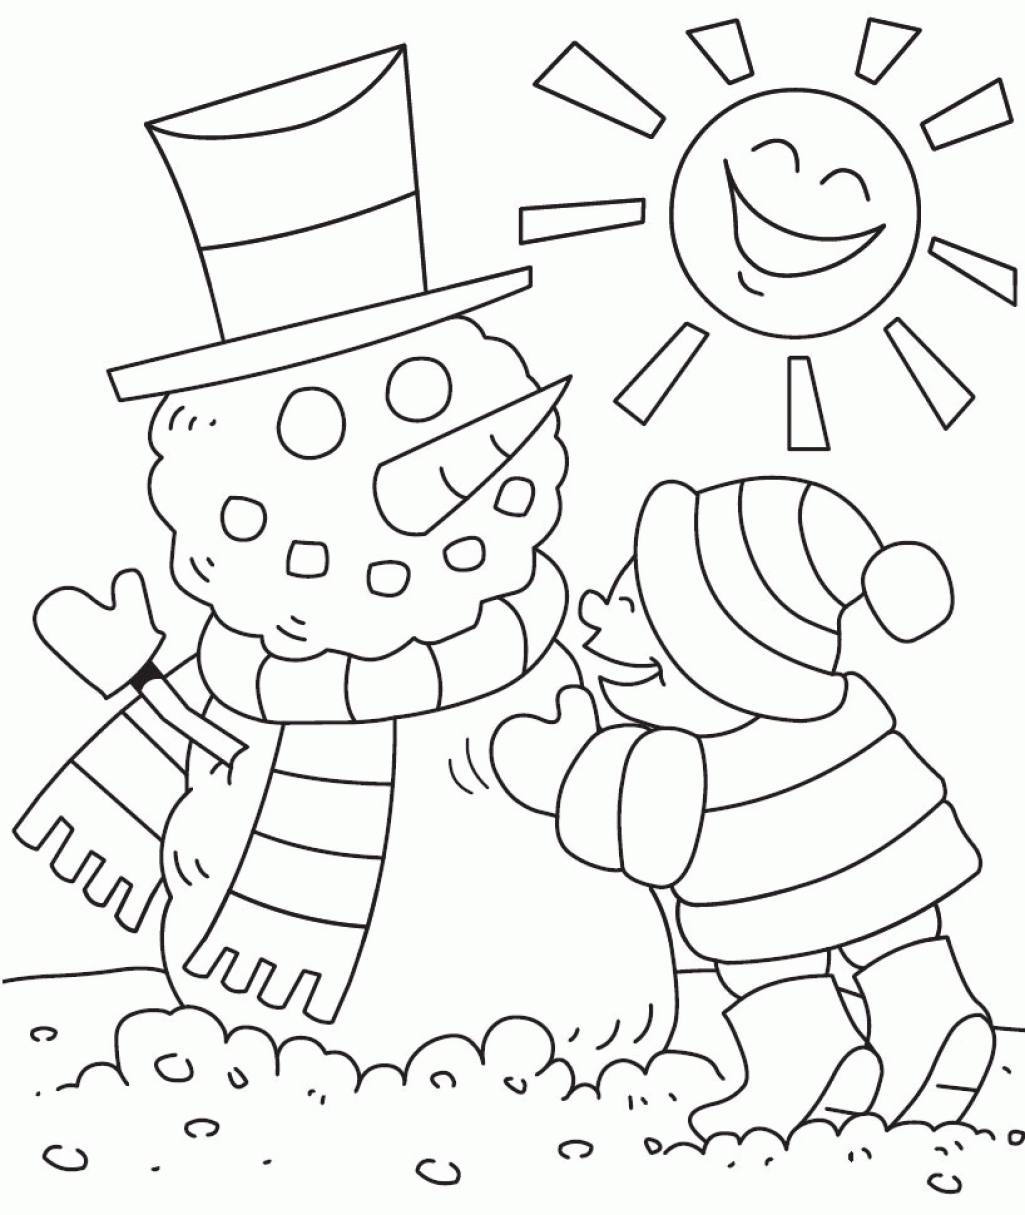 Winter Holiday Printable Coloring Pages - High Quality Coloring Pages